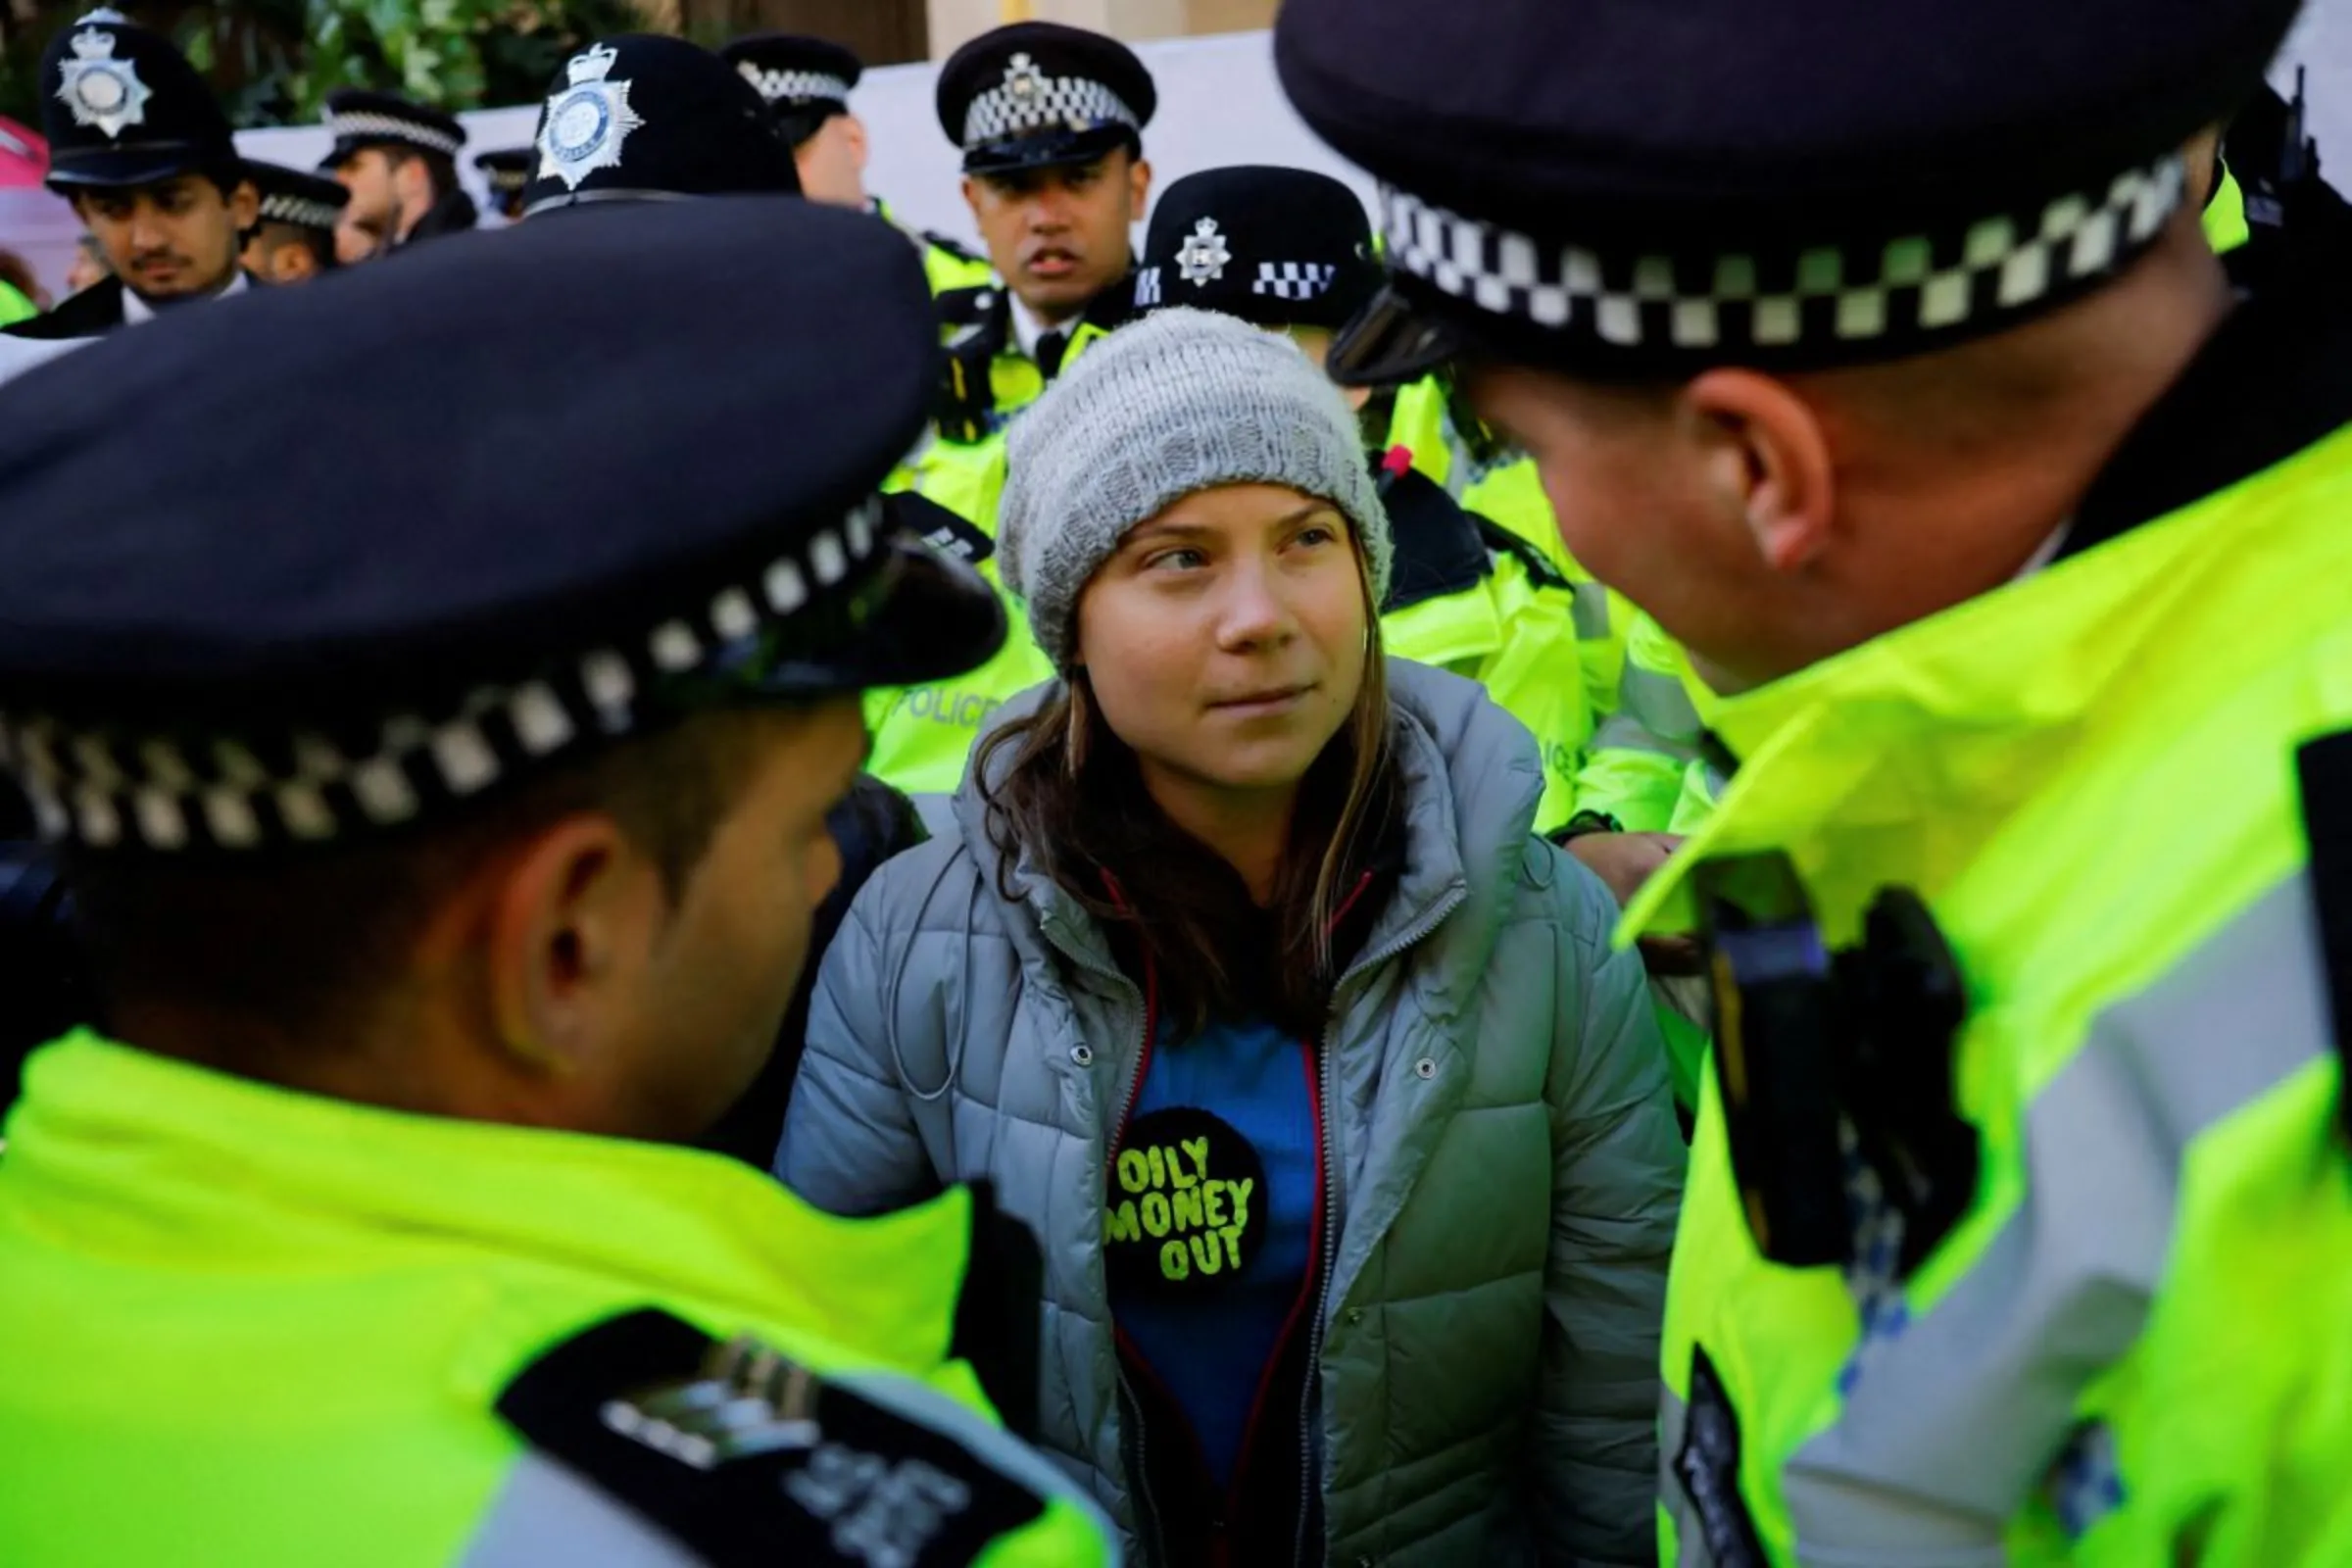 Swedish climate campaigner Greta Thunberg is detained during an Oily Money Out and Fossil Free London protest in London, Britain, October 17, 2023. REUTERS/Clodagh Kilcoyne